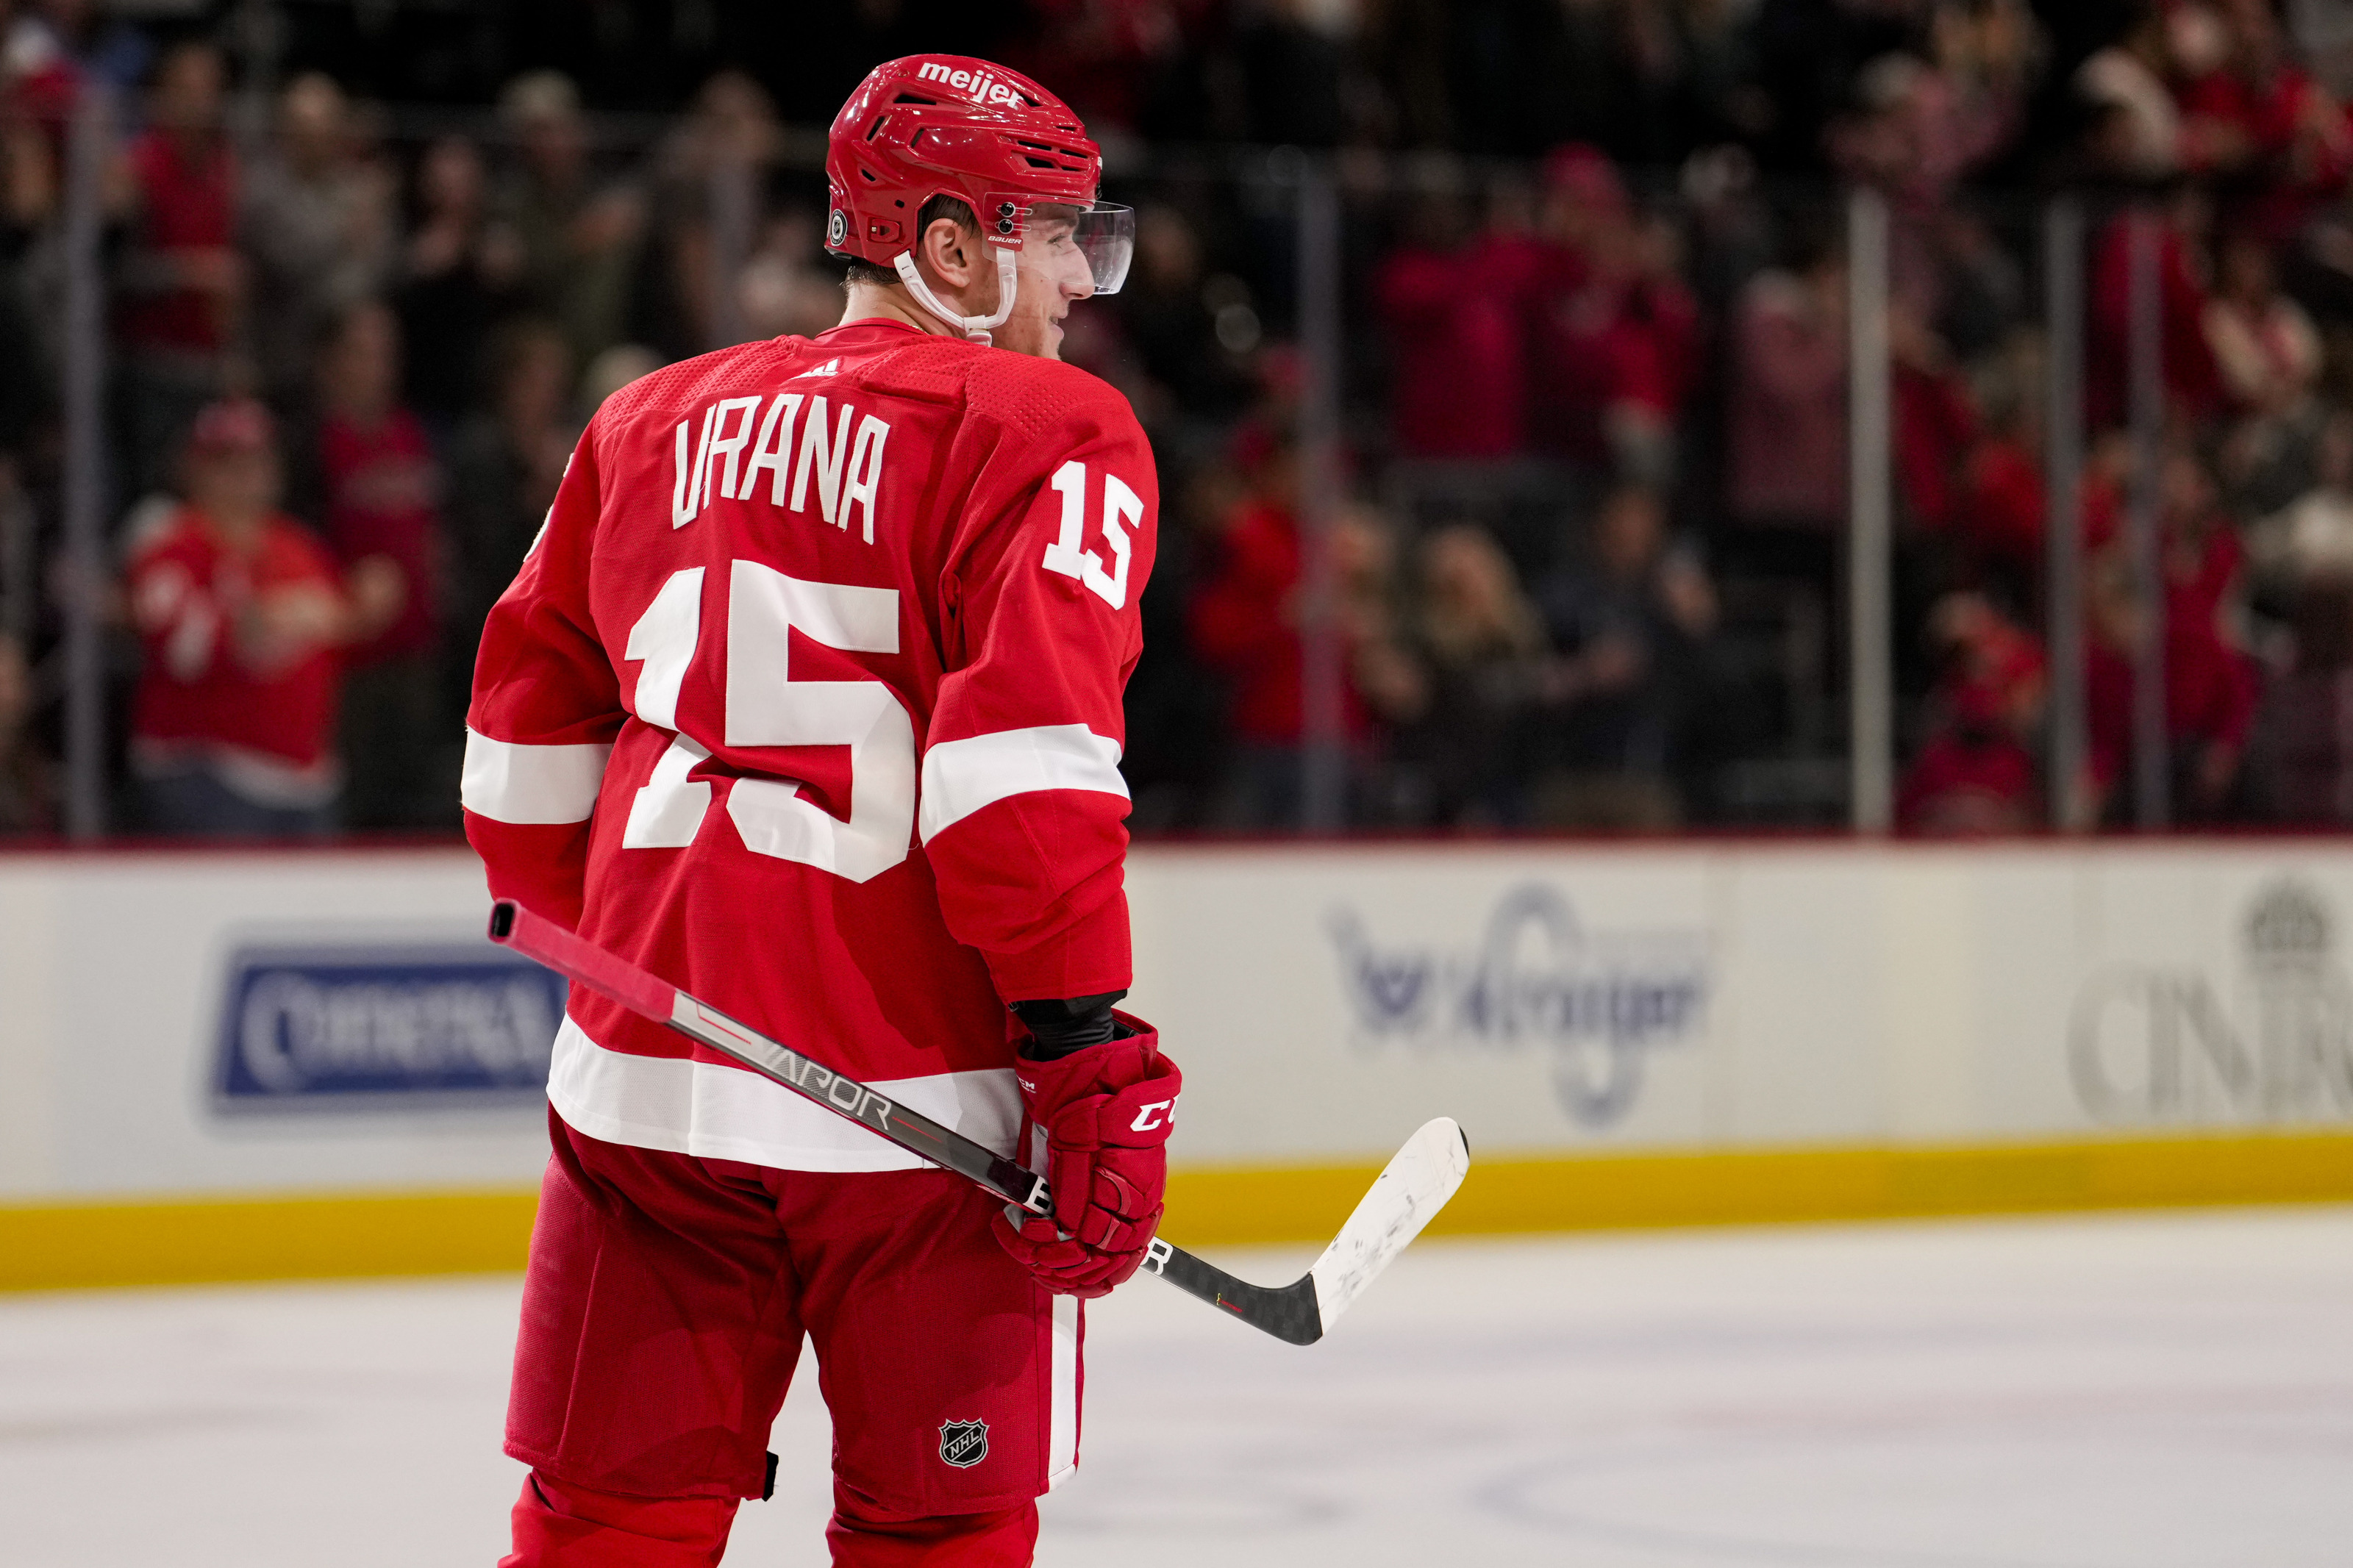 Jakub Vrána could be late season addition the Detroit Red Wings need